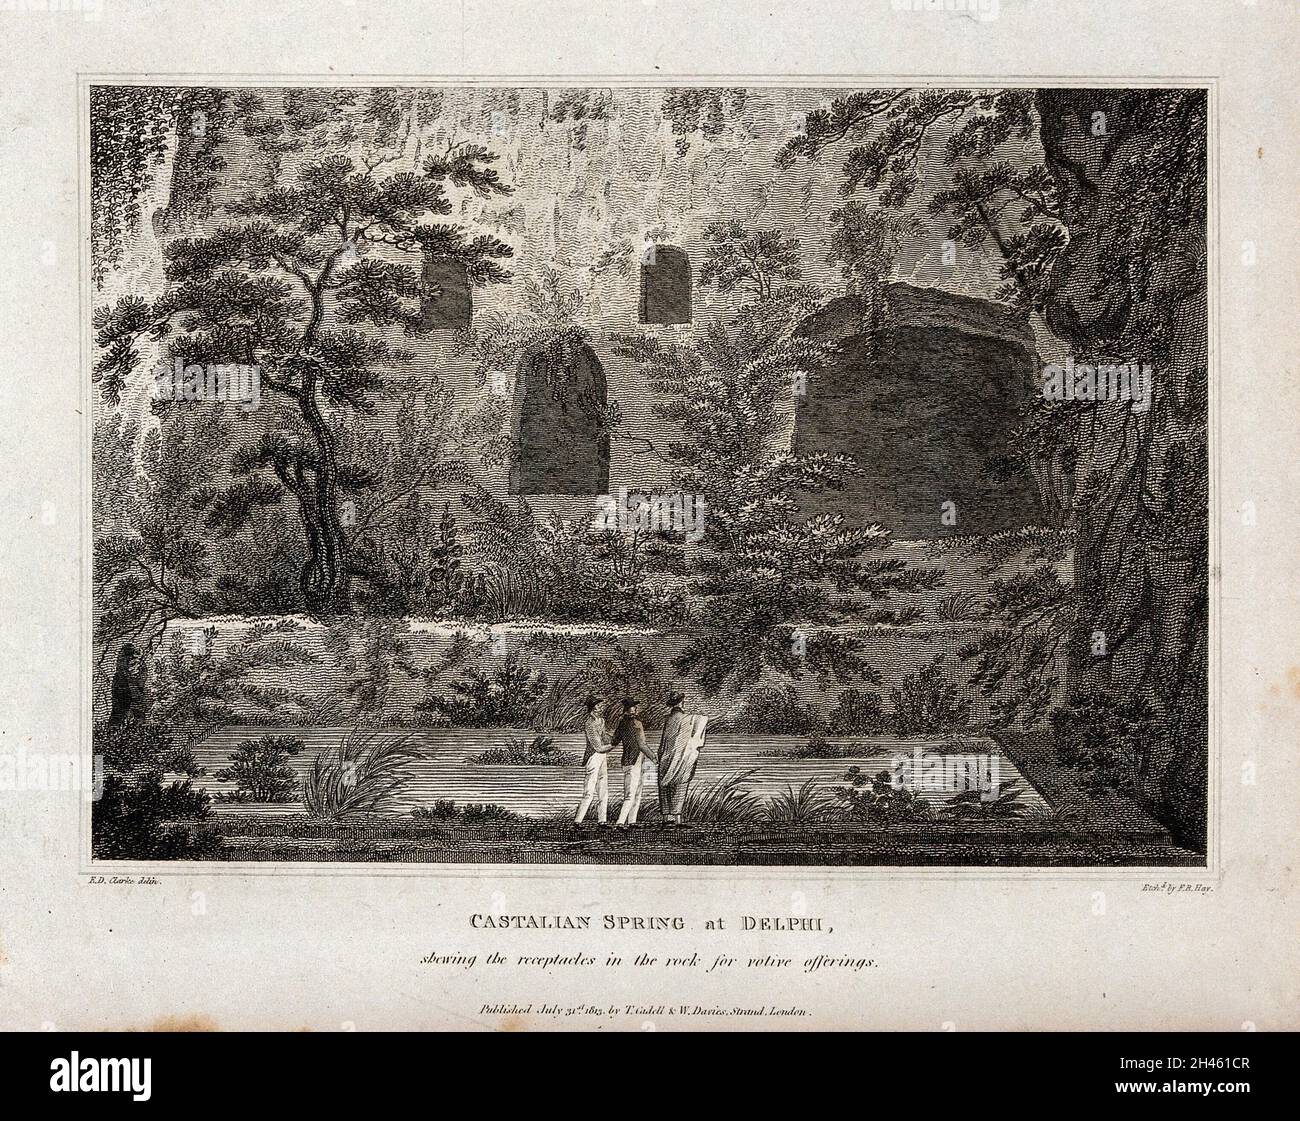 The Castalian spring at Delphi; the cavities in the rock are for votive offerings. Etching by F.R. Hay, 1813, after E.D. Clarke. Stock Photo